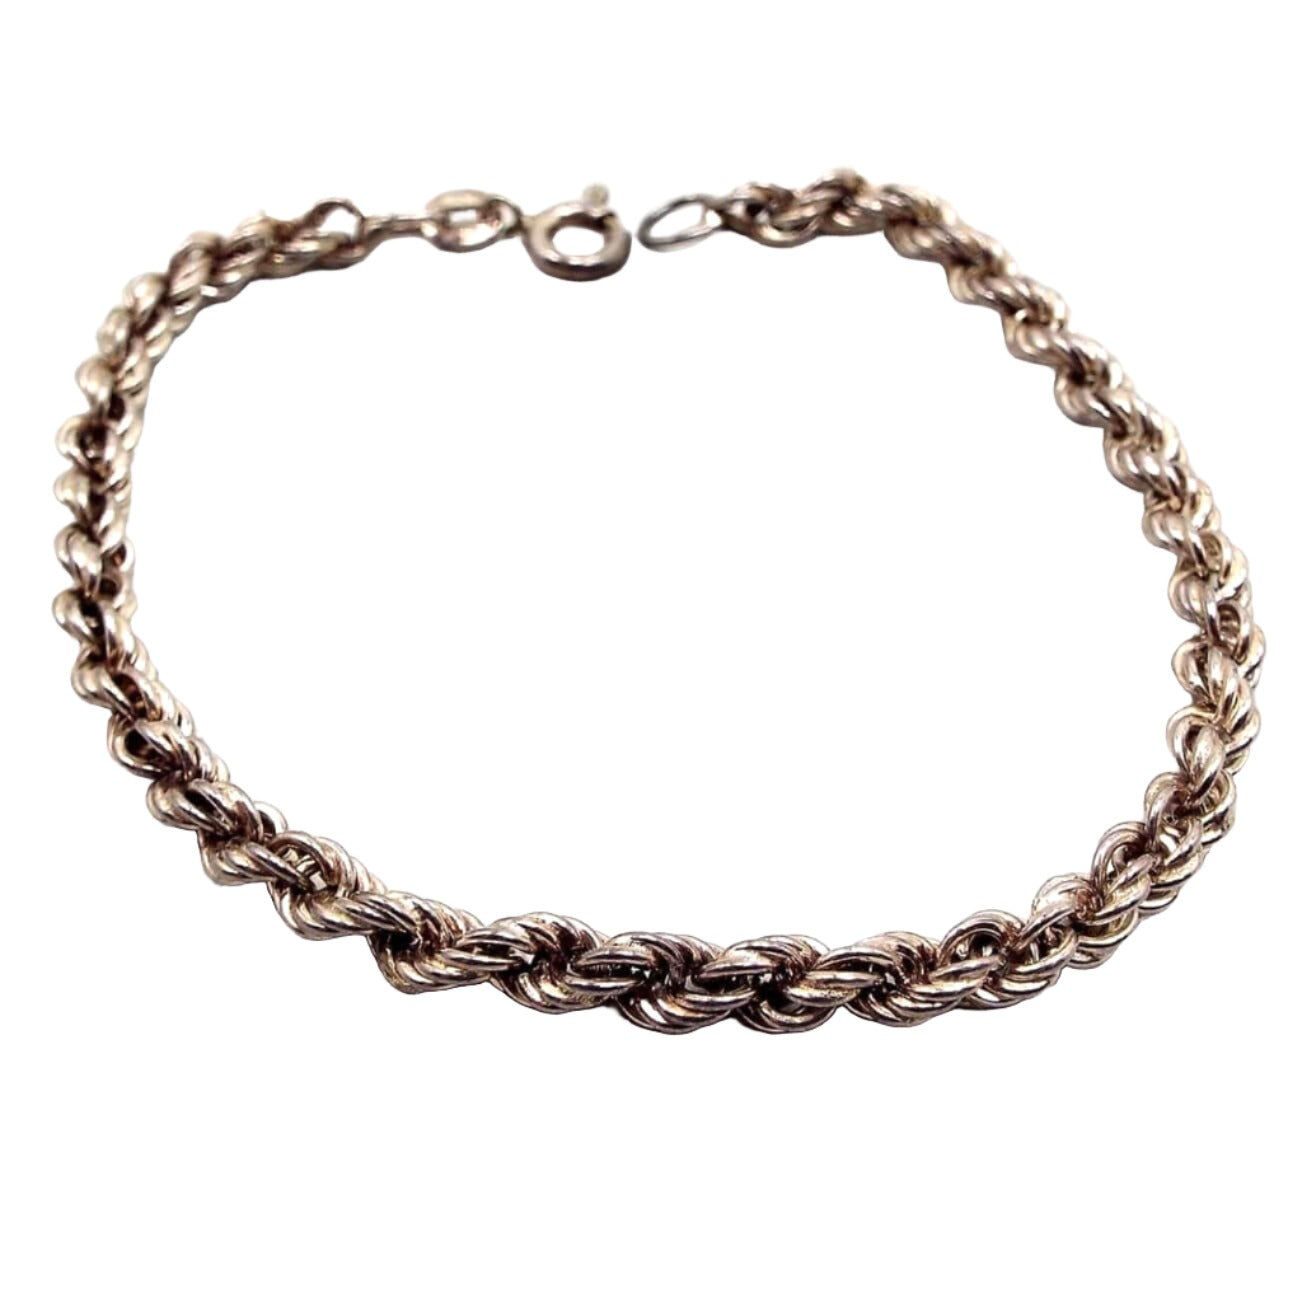 Angled view of the retro vintage Italian sterling silver chain bracelet. It is a darkened silver tone in color and has a twisted rope link design. There is a spring ring clasp at the end.